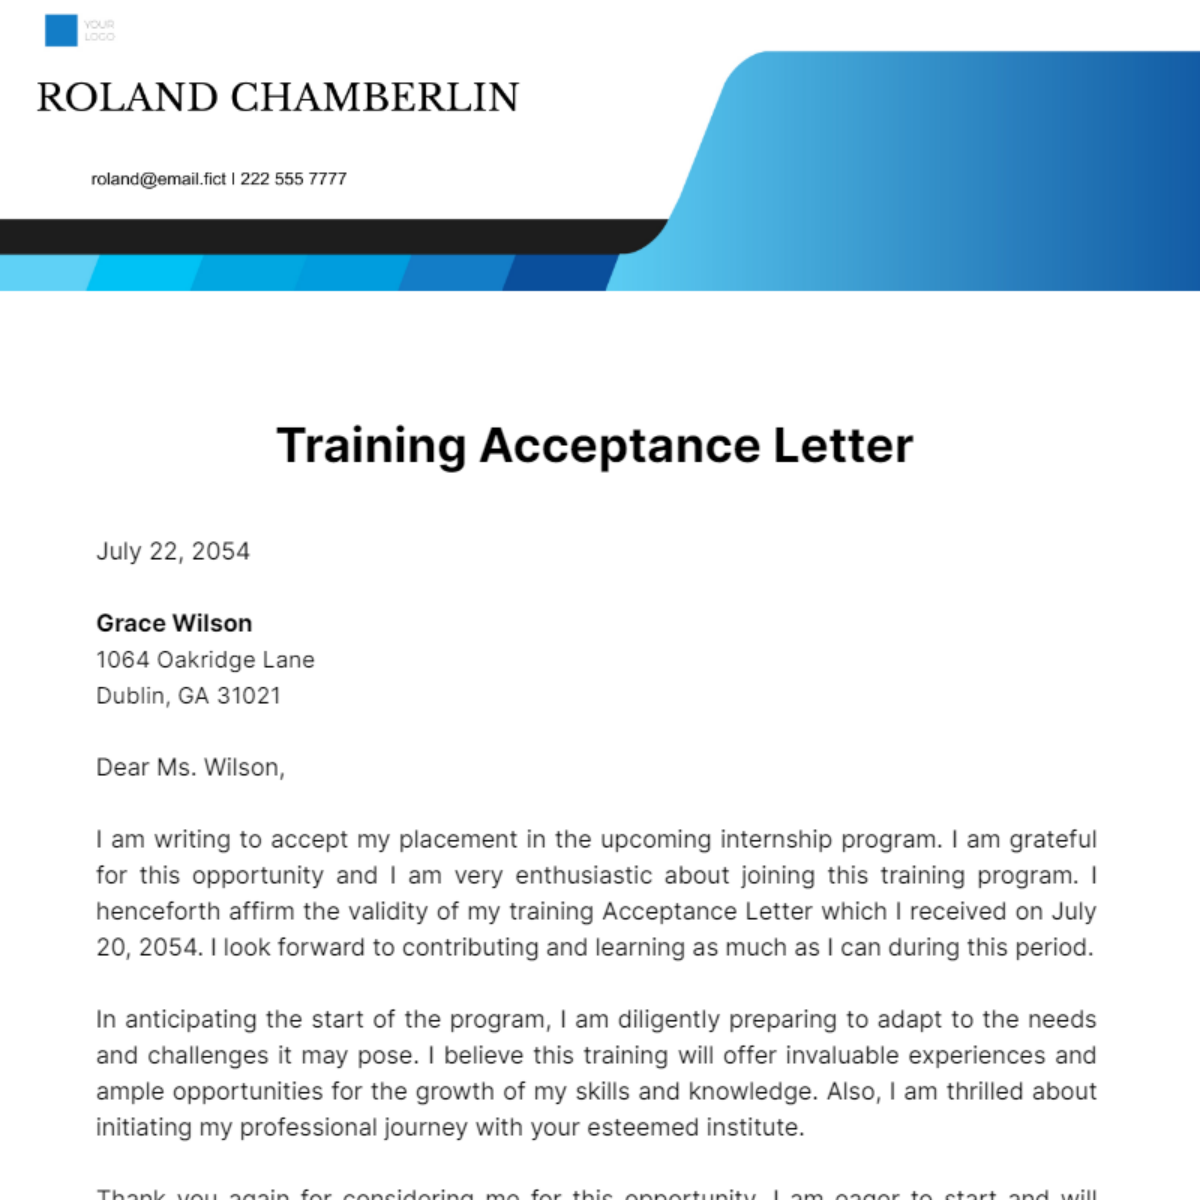 Free Training Acceptance Letter Template